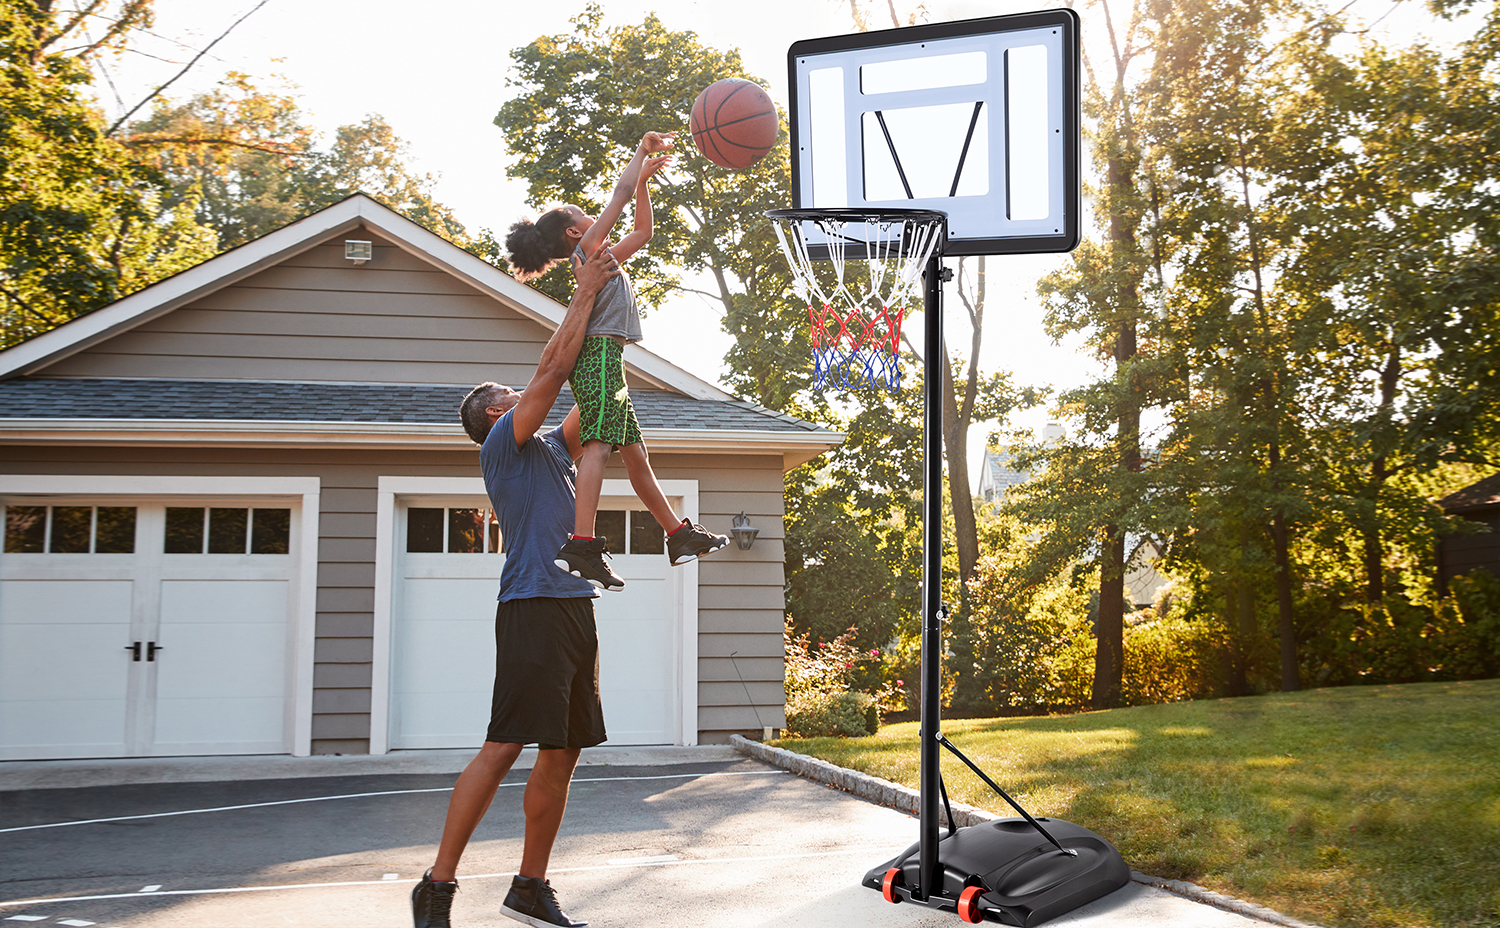 501207Father And Son Playing Basketball On Driveway At Home